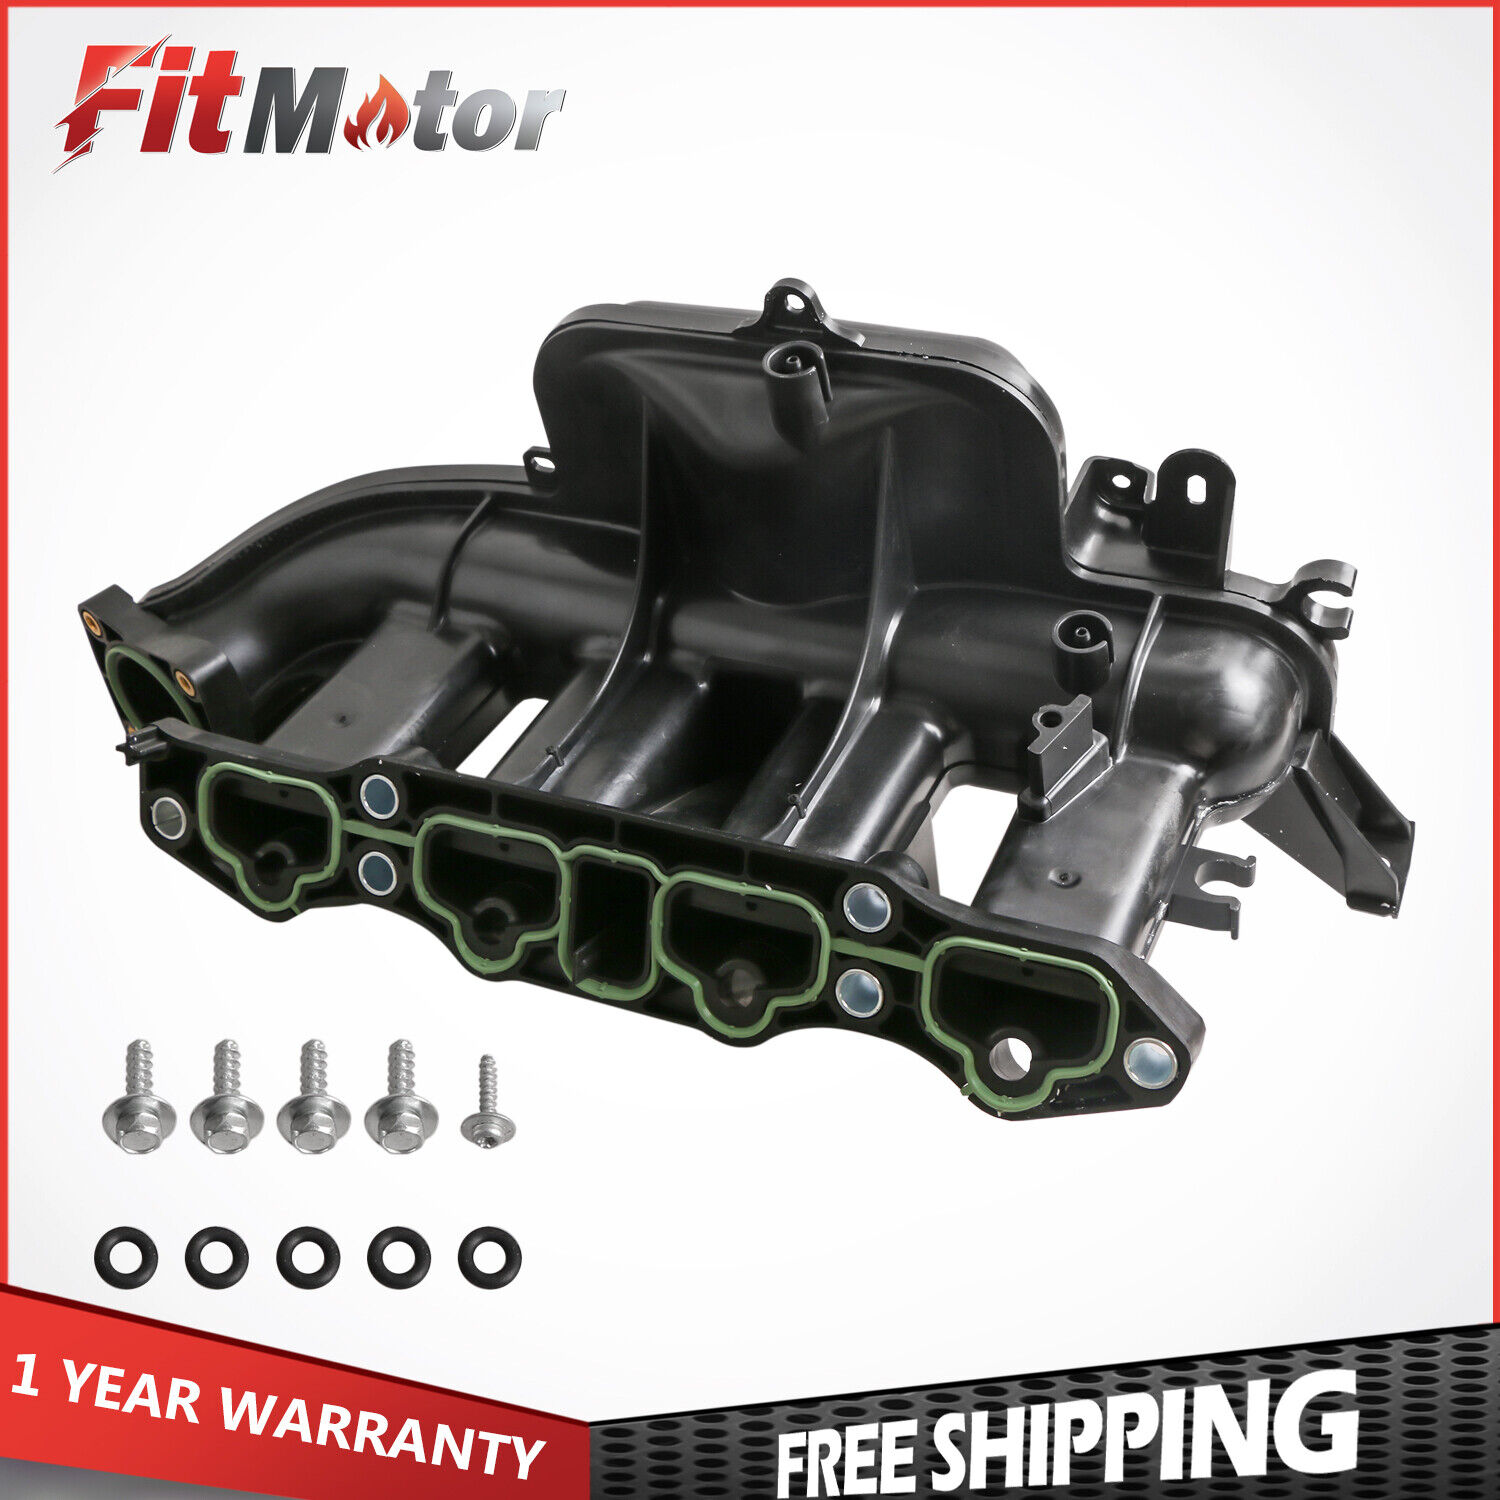 Engine Intake Manifold with Bolts For Chevy Cruze Sonic LS LT Buick Encore 1.4L